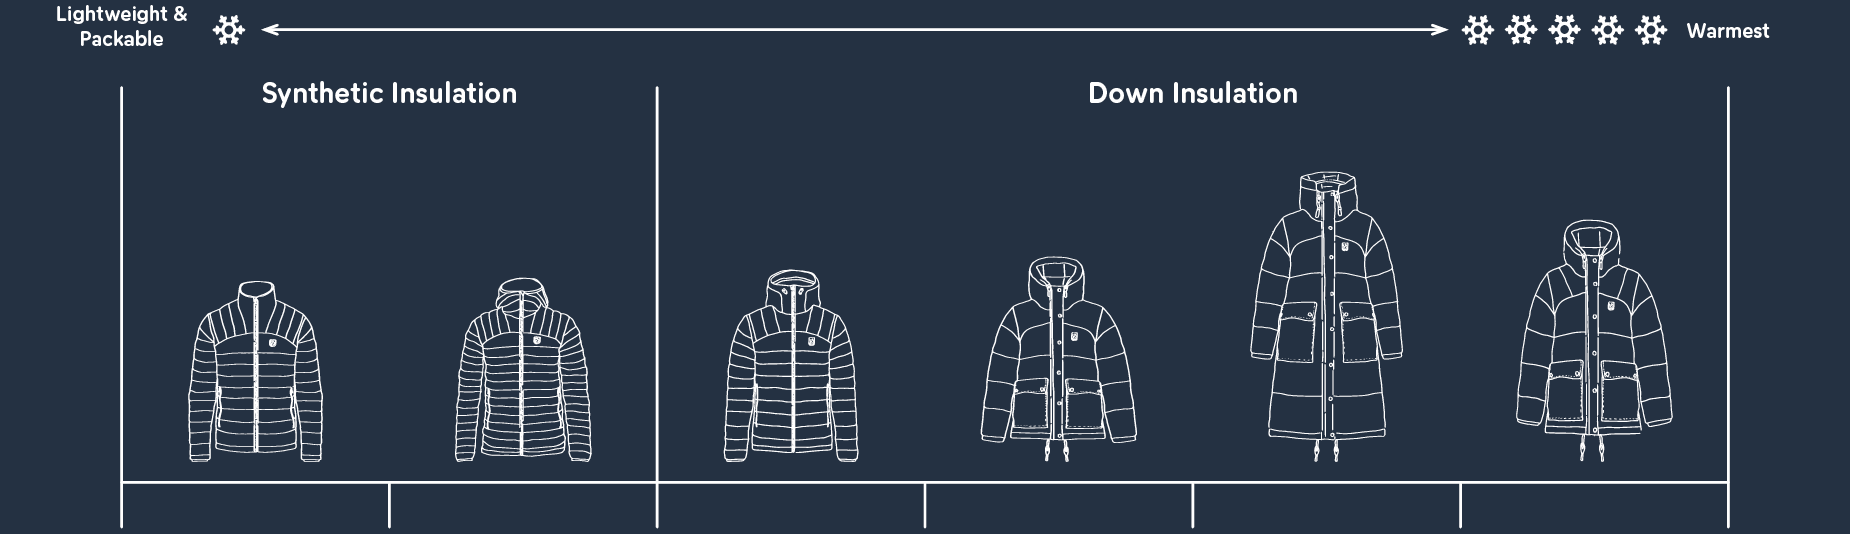 Lineup of six expedition jackets from Lightweight and packable jackets to the warmest jackets